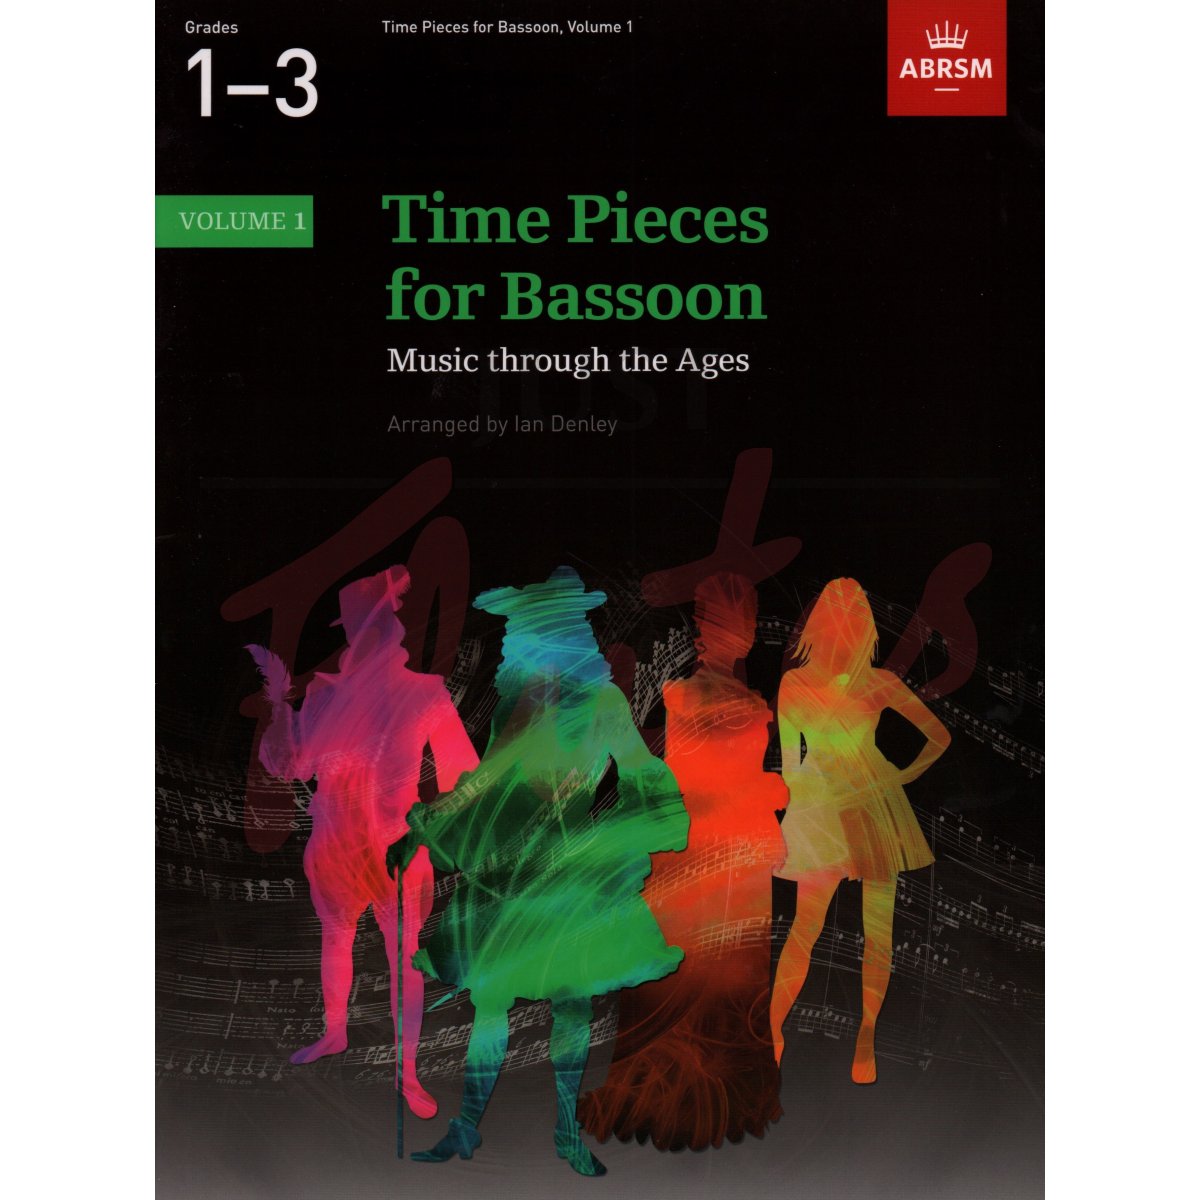 Time Pieces for Bassoon Vol 1